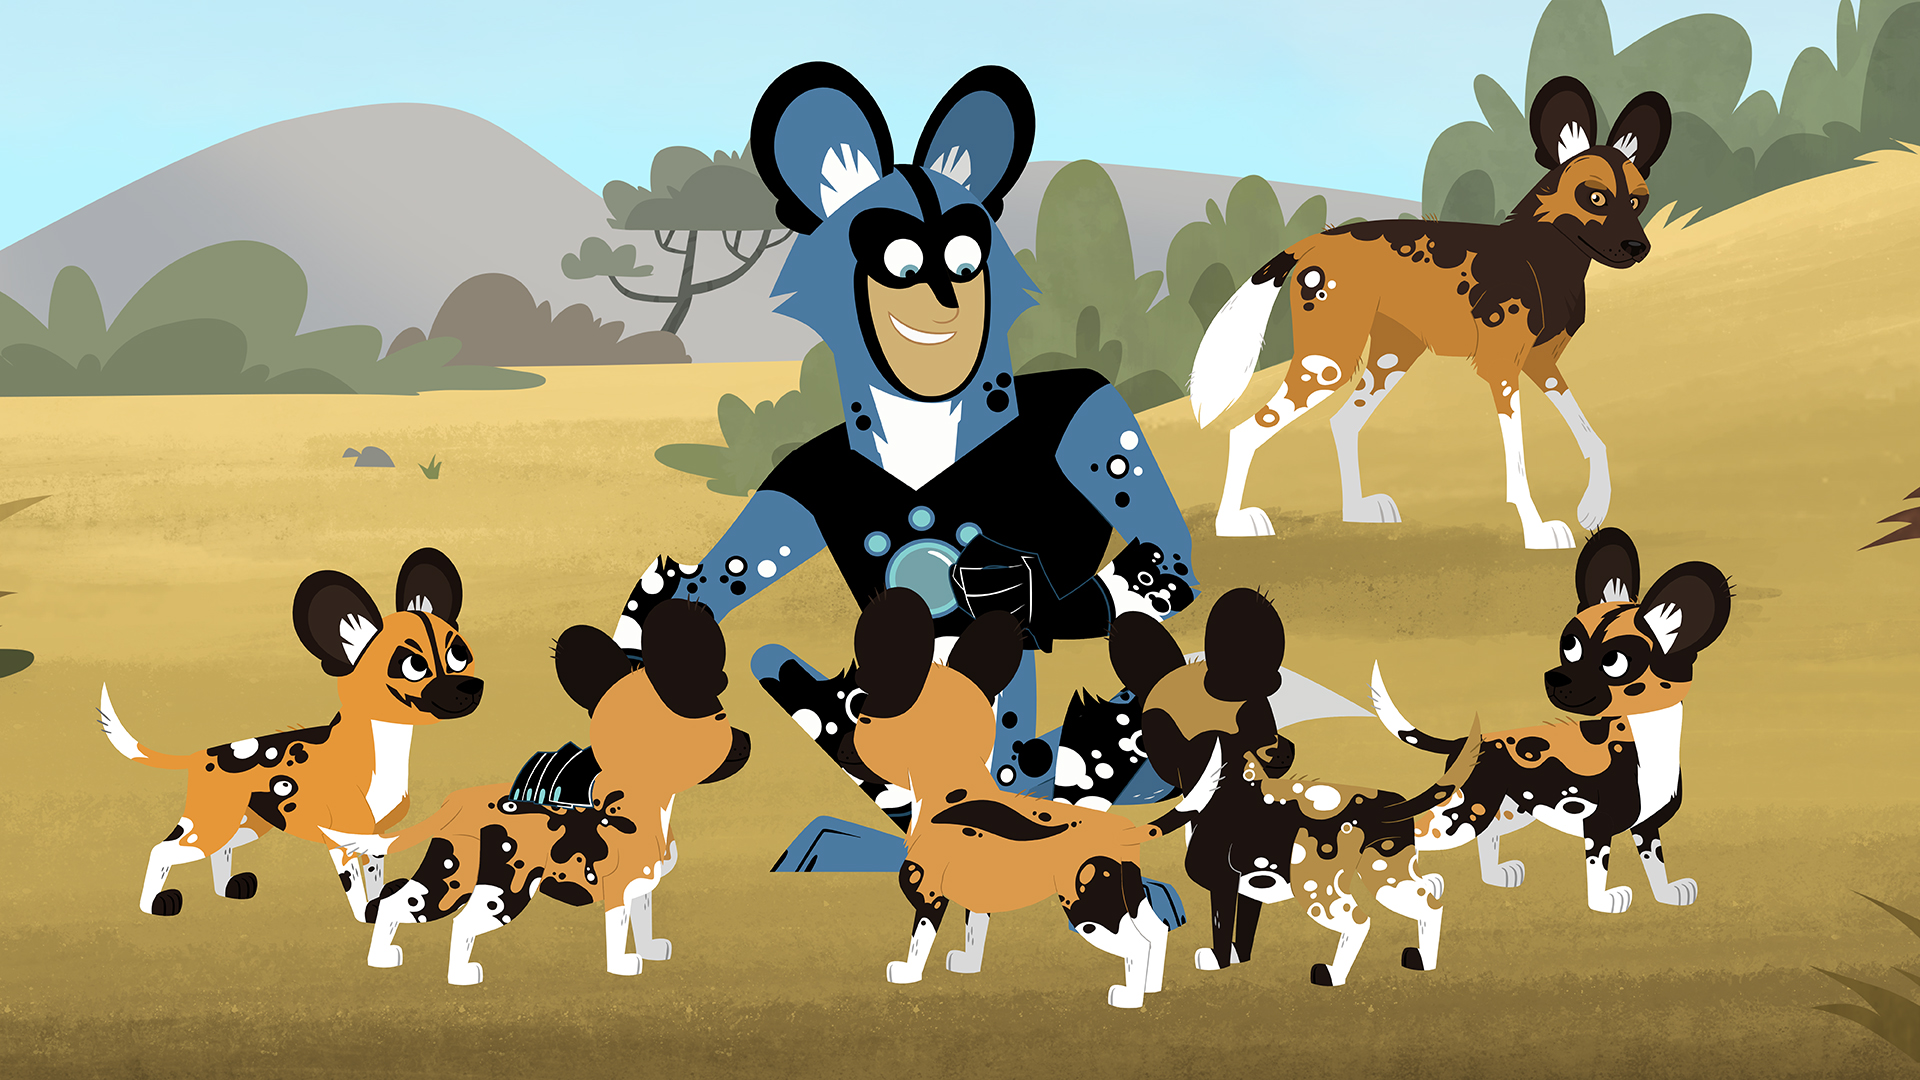 Cats and dogs go wild in new 'Wild Kratts' special Q&A with the Kratt